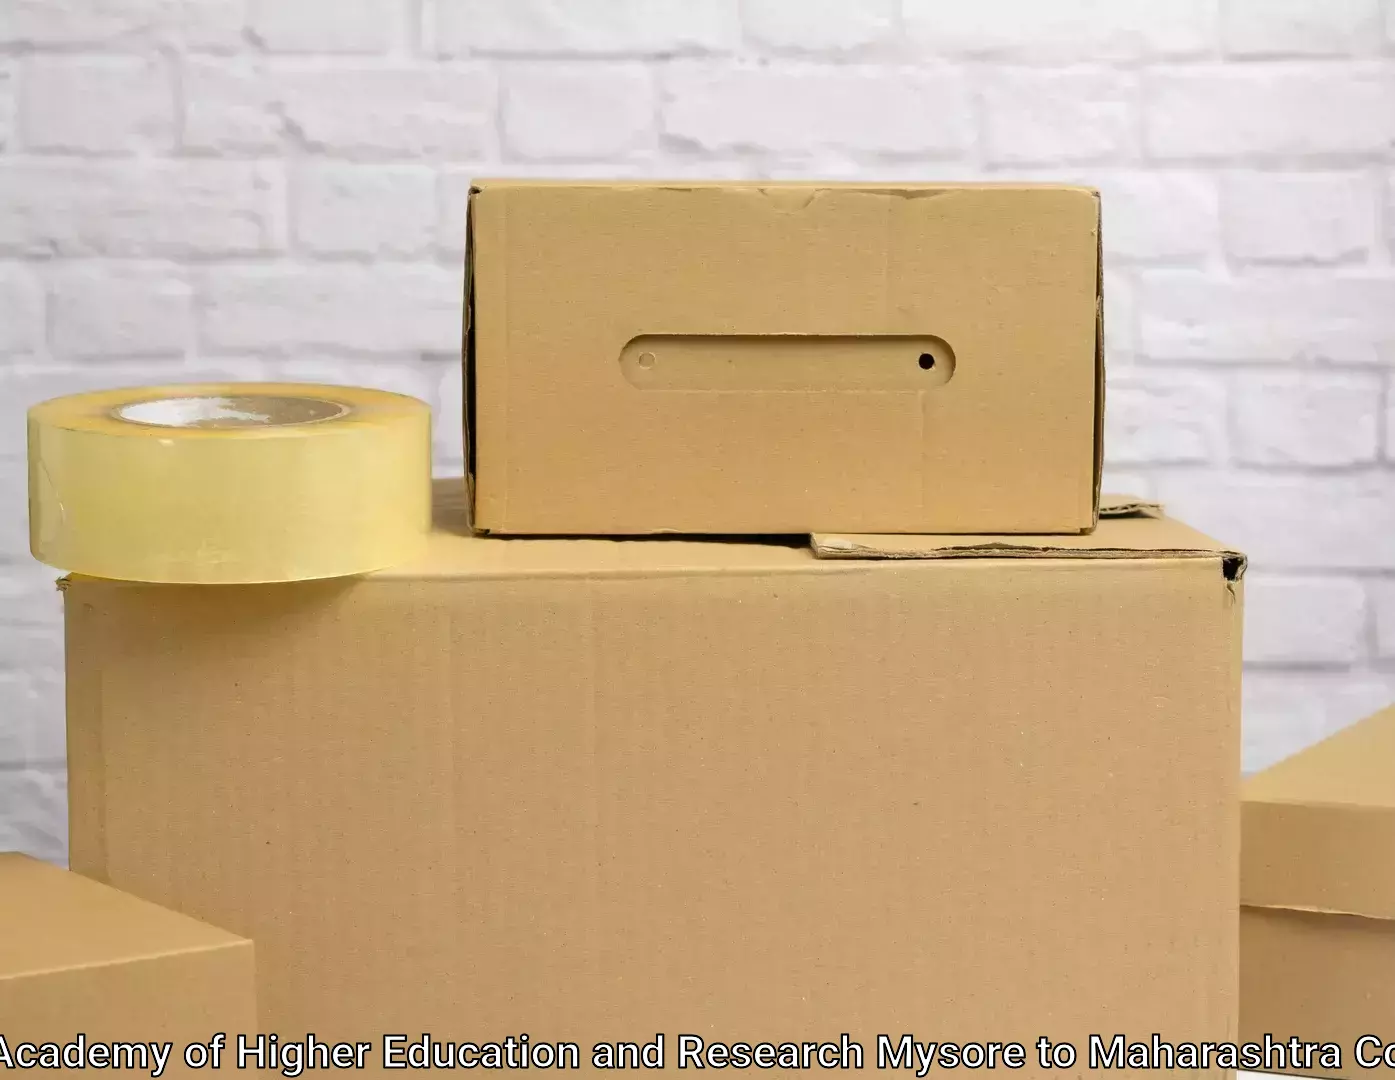 Dependable moving services JSS Academy of Higher Education and Research Mysore to Maharashtra